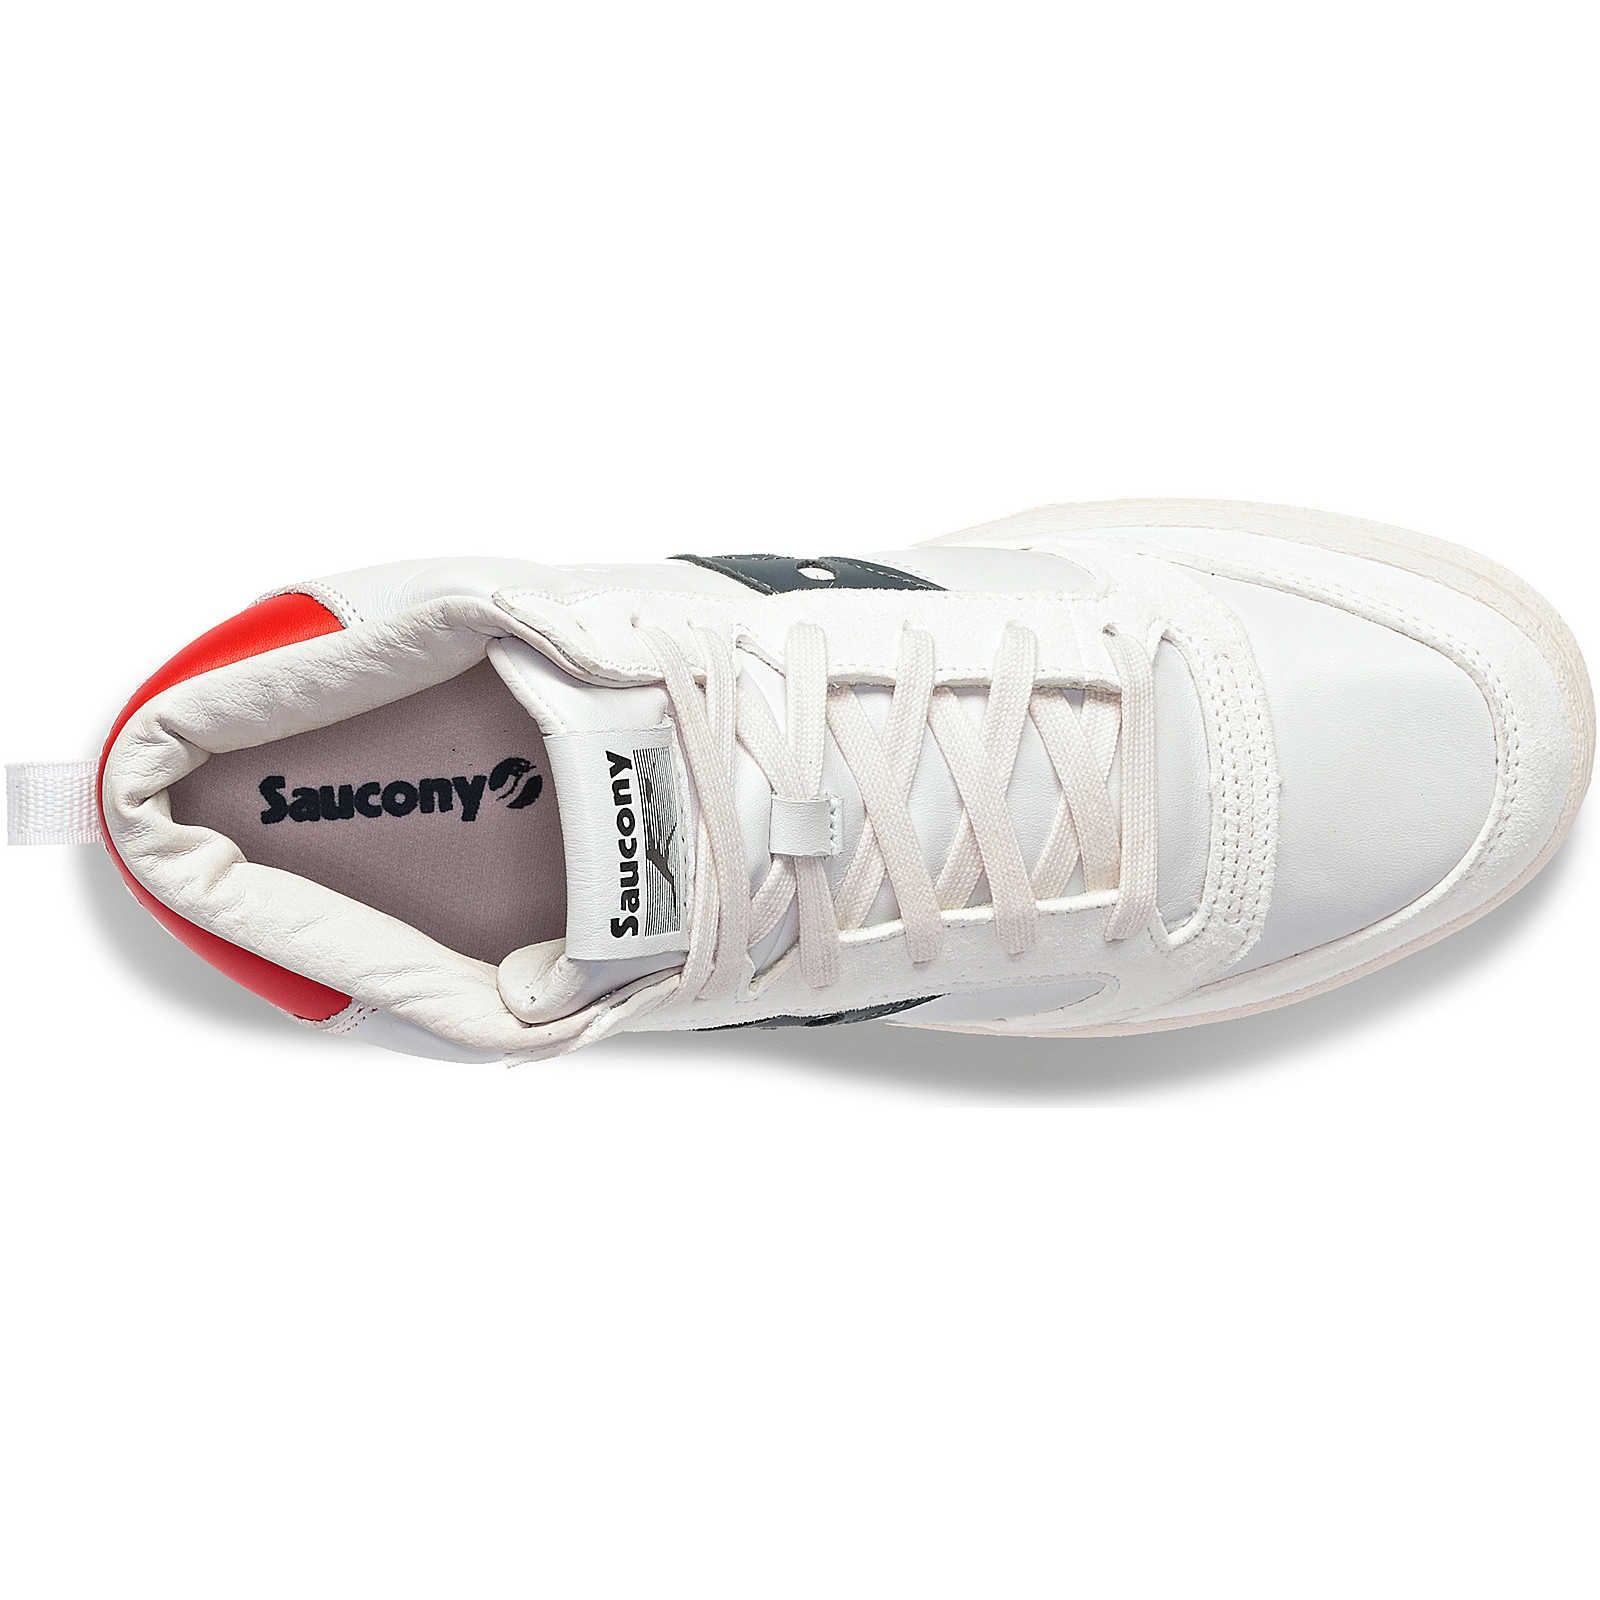 Saucony Mens Jazz Court High Top Trainers - White / Navy